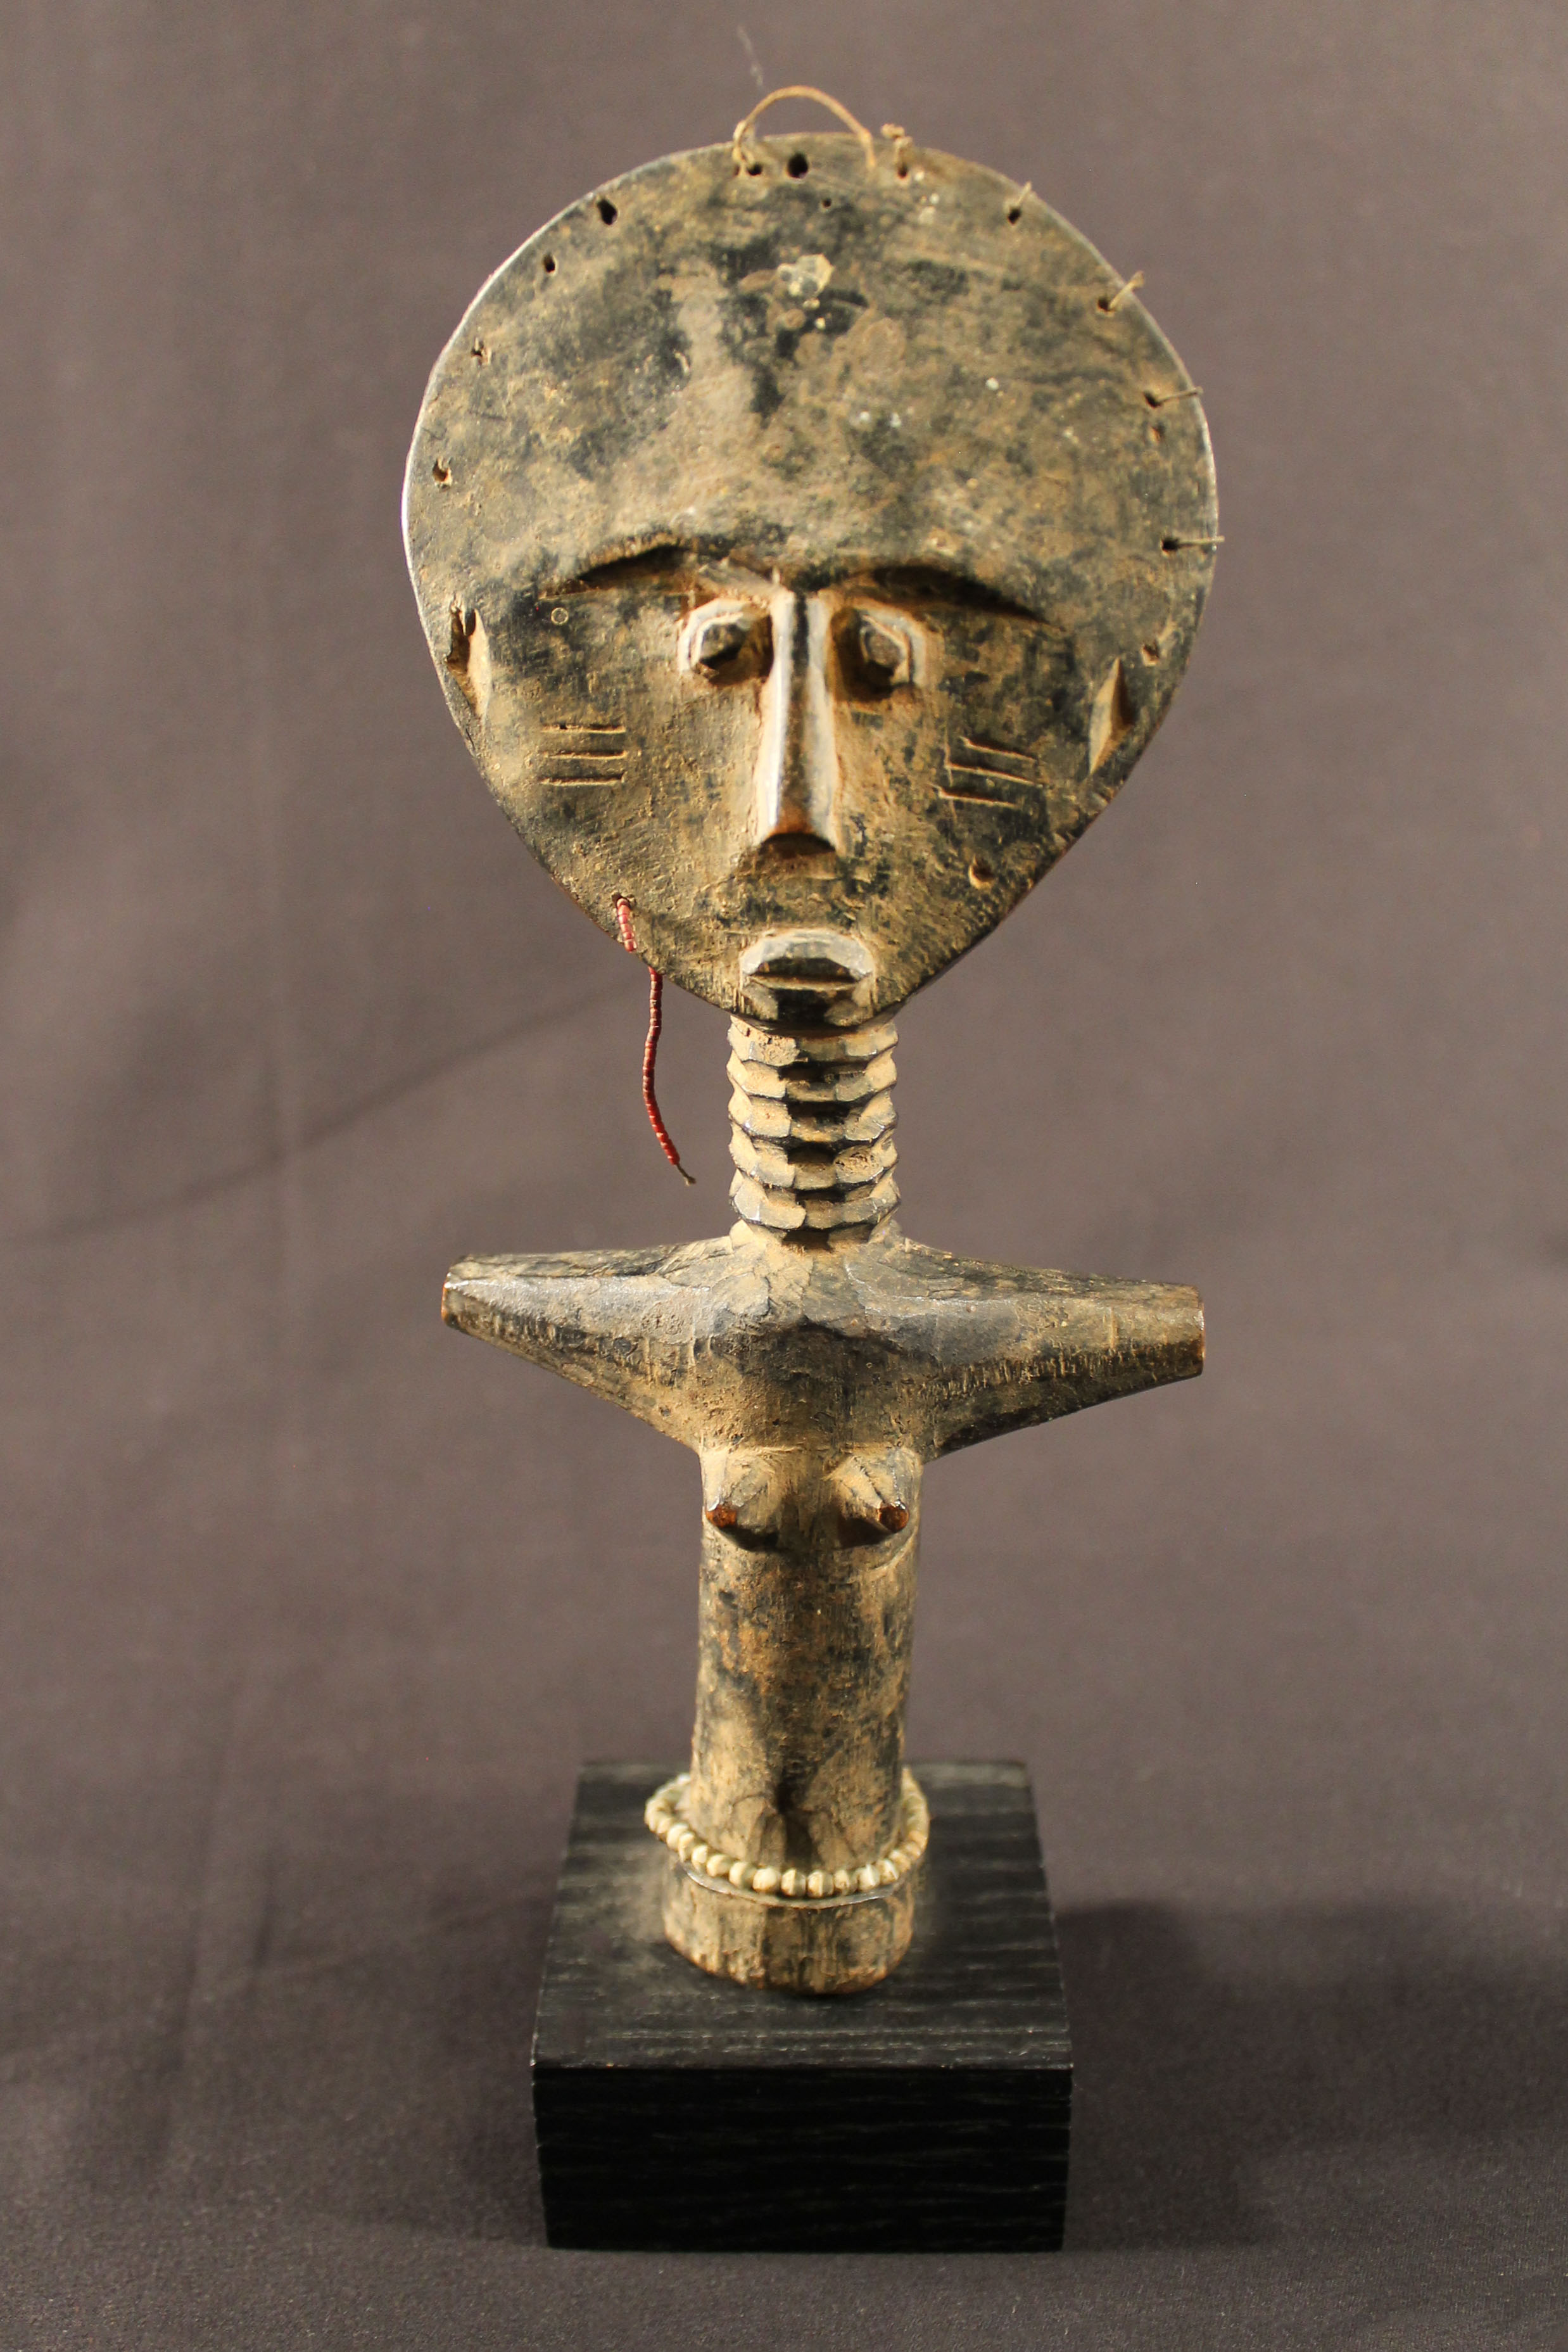 Carved wooden statue of a female figure in a cross pose with arms out. The woman has a large head with a string woven at the top. She has pointed breasts and is wearing waist beads. The statue sits on a dark wood base.